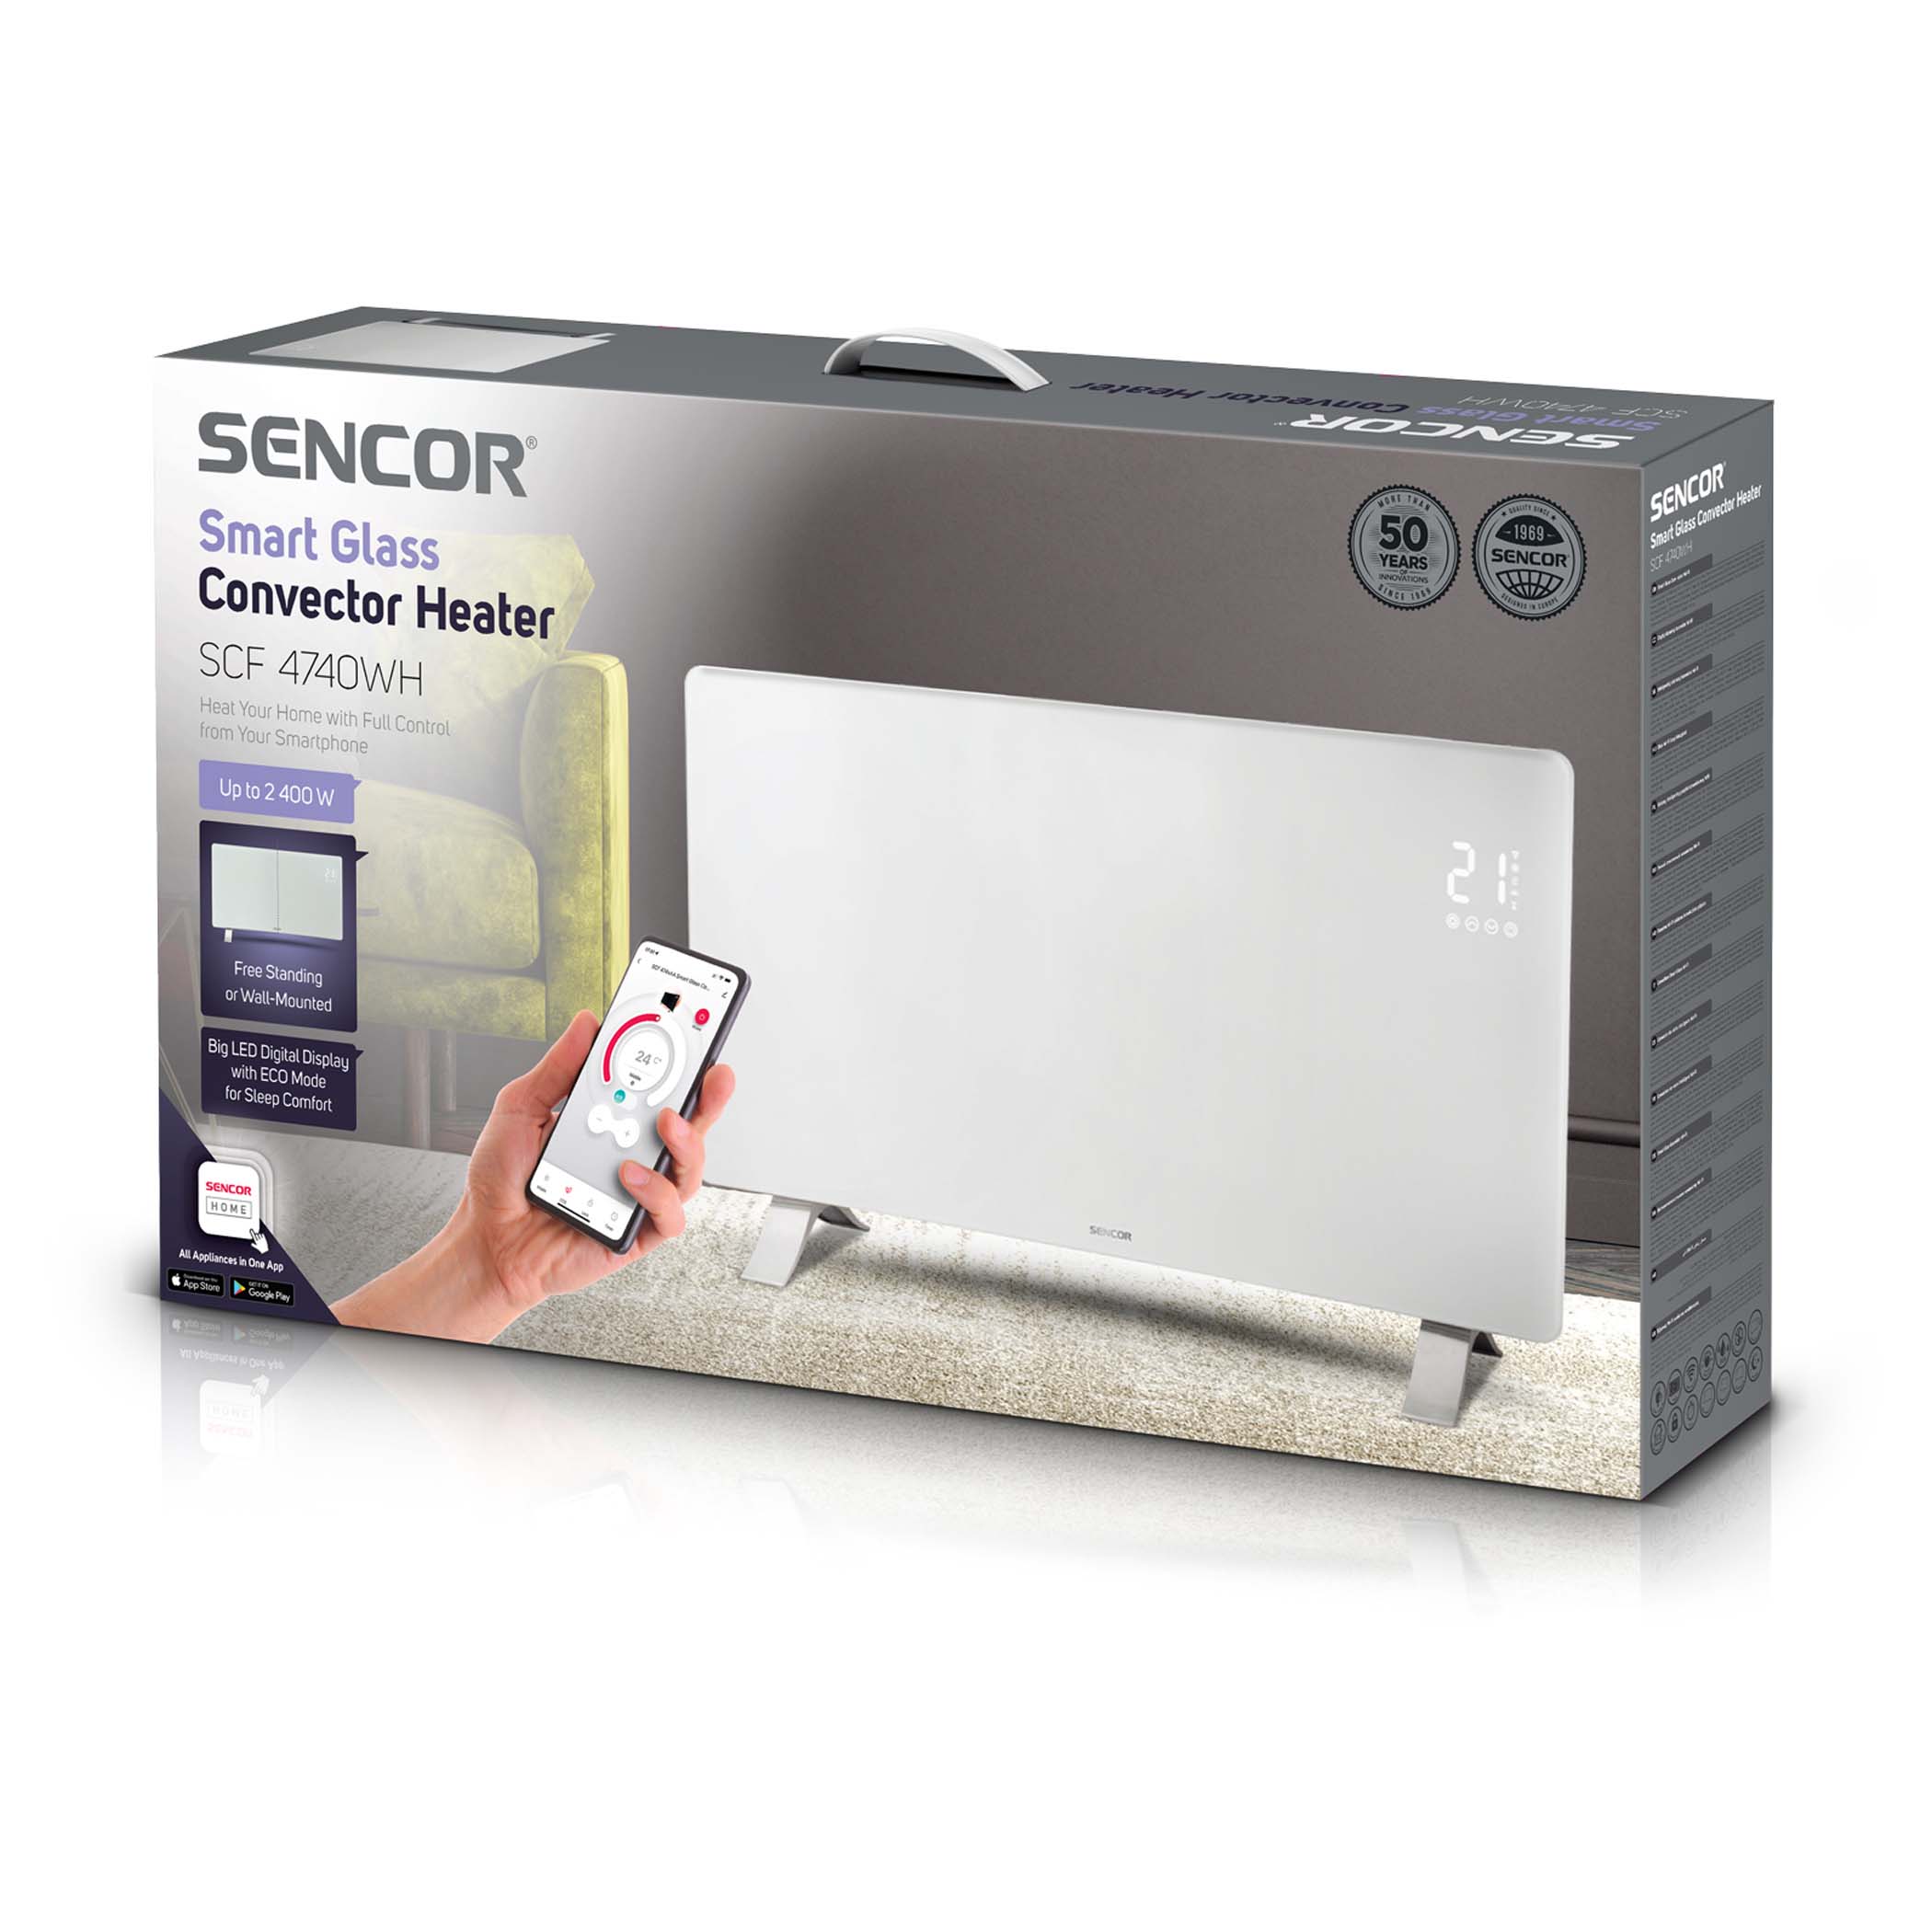 Wall mounted atmospheric touch screen control body dryer for